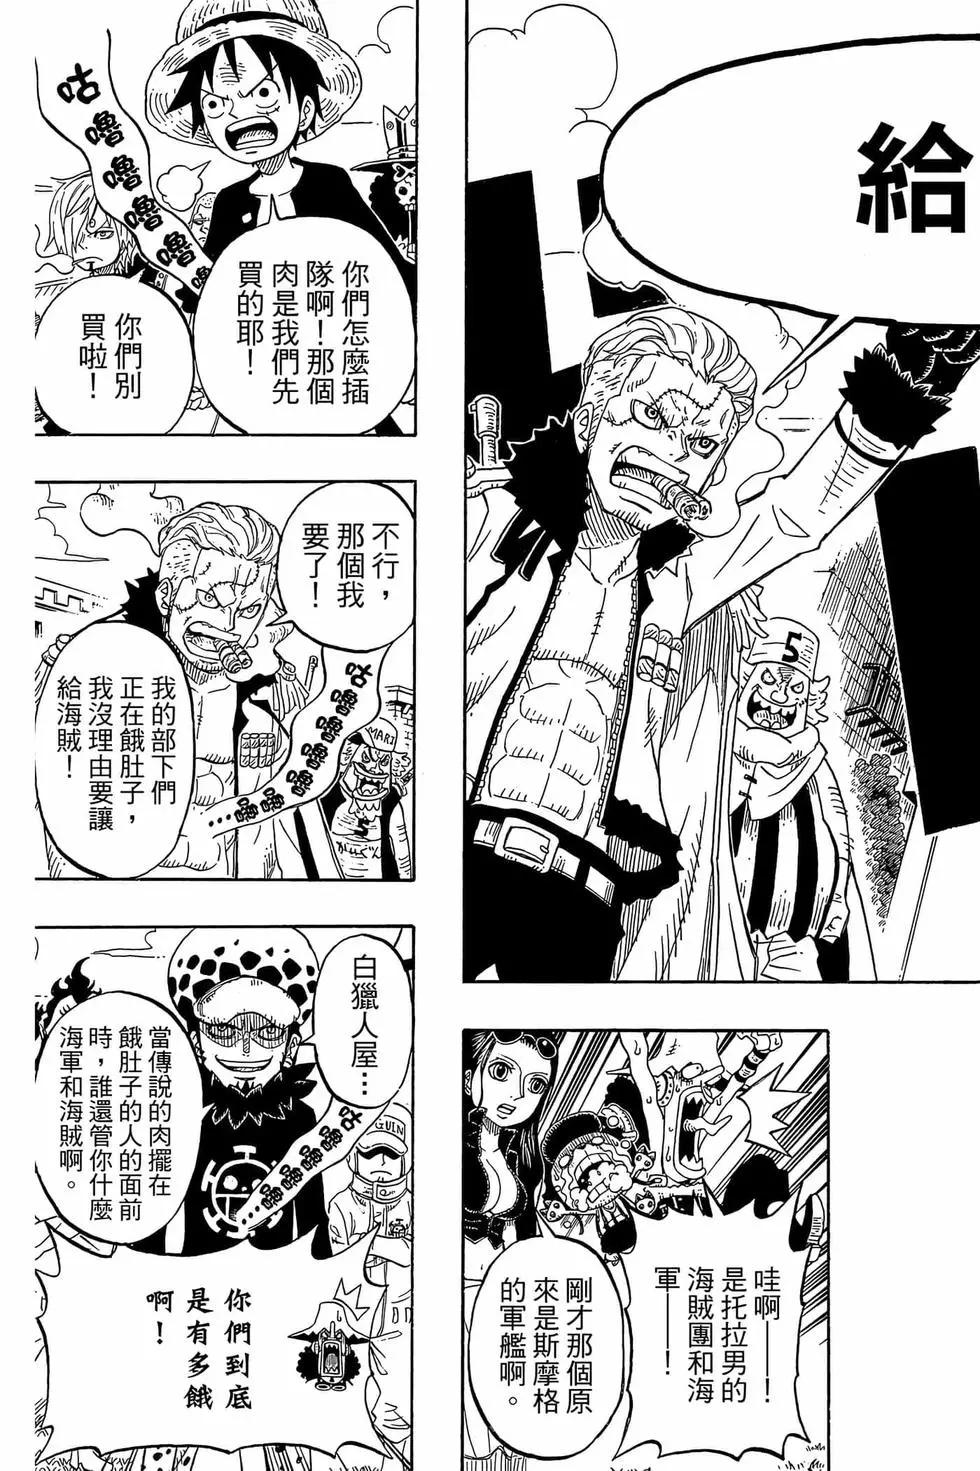 One piece party - 第01卷(1/4) - 8